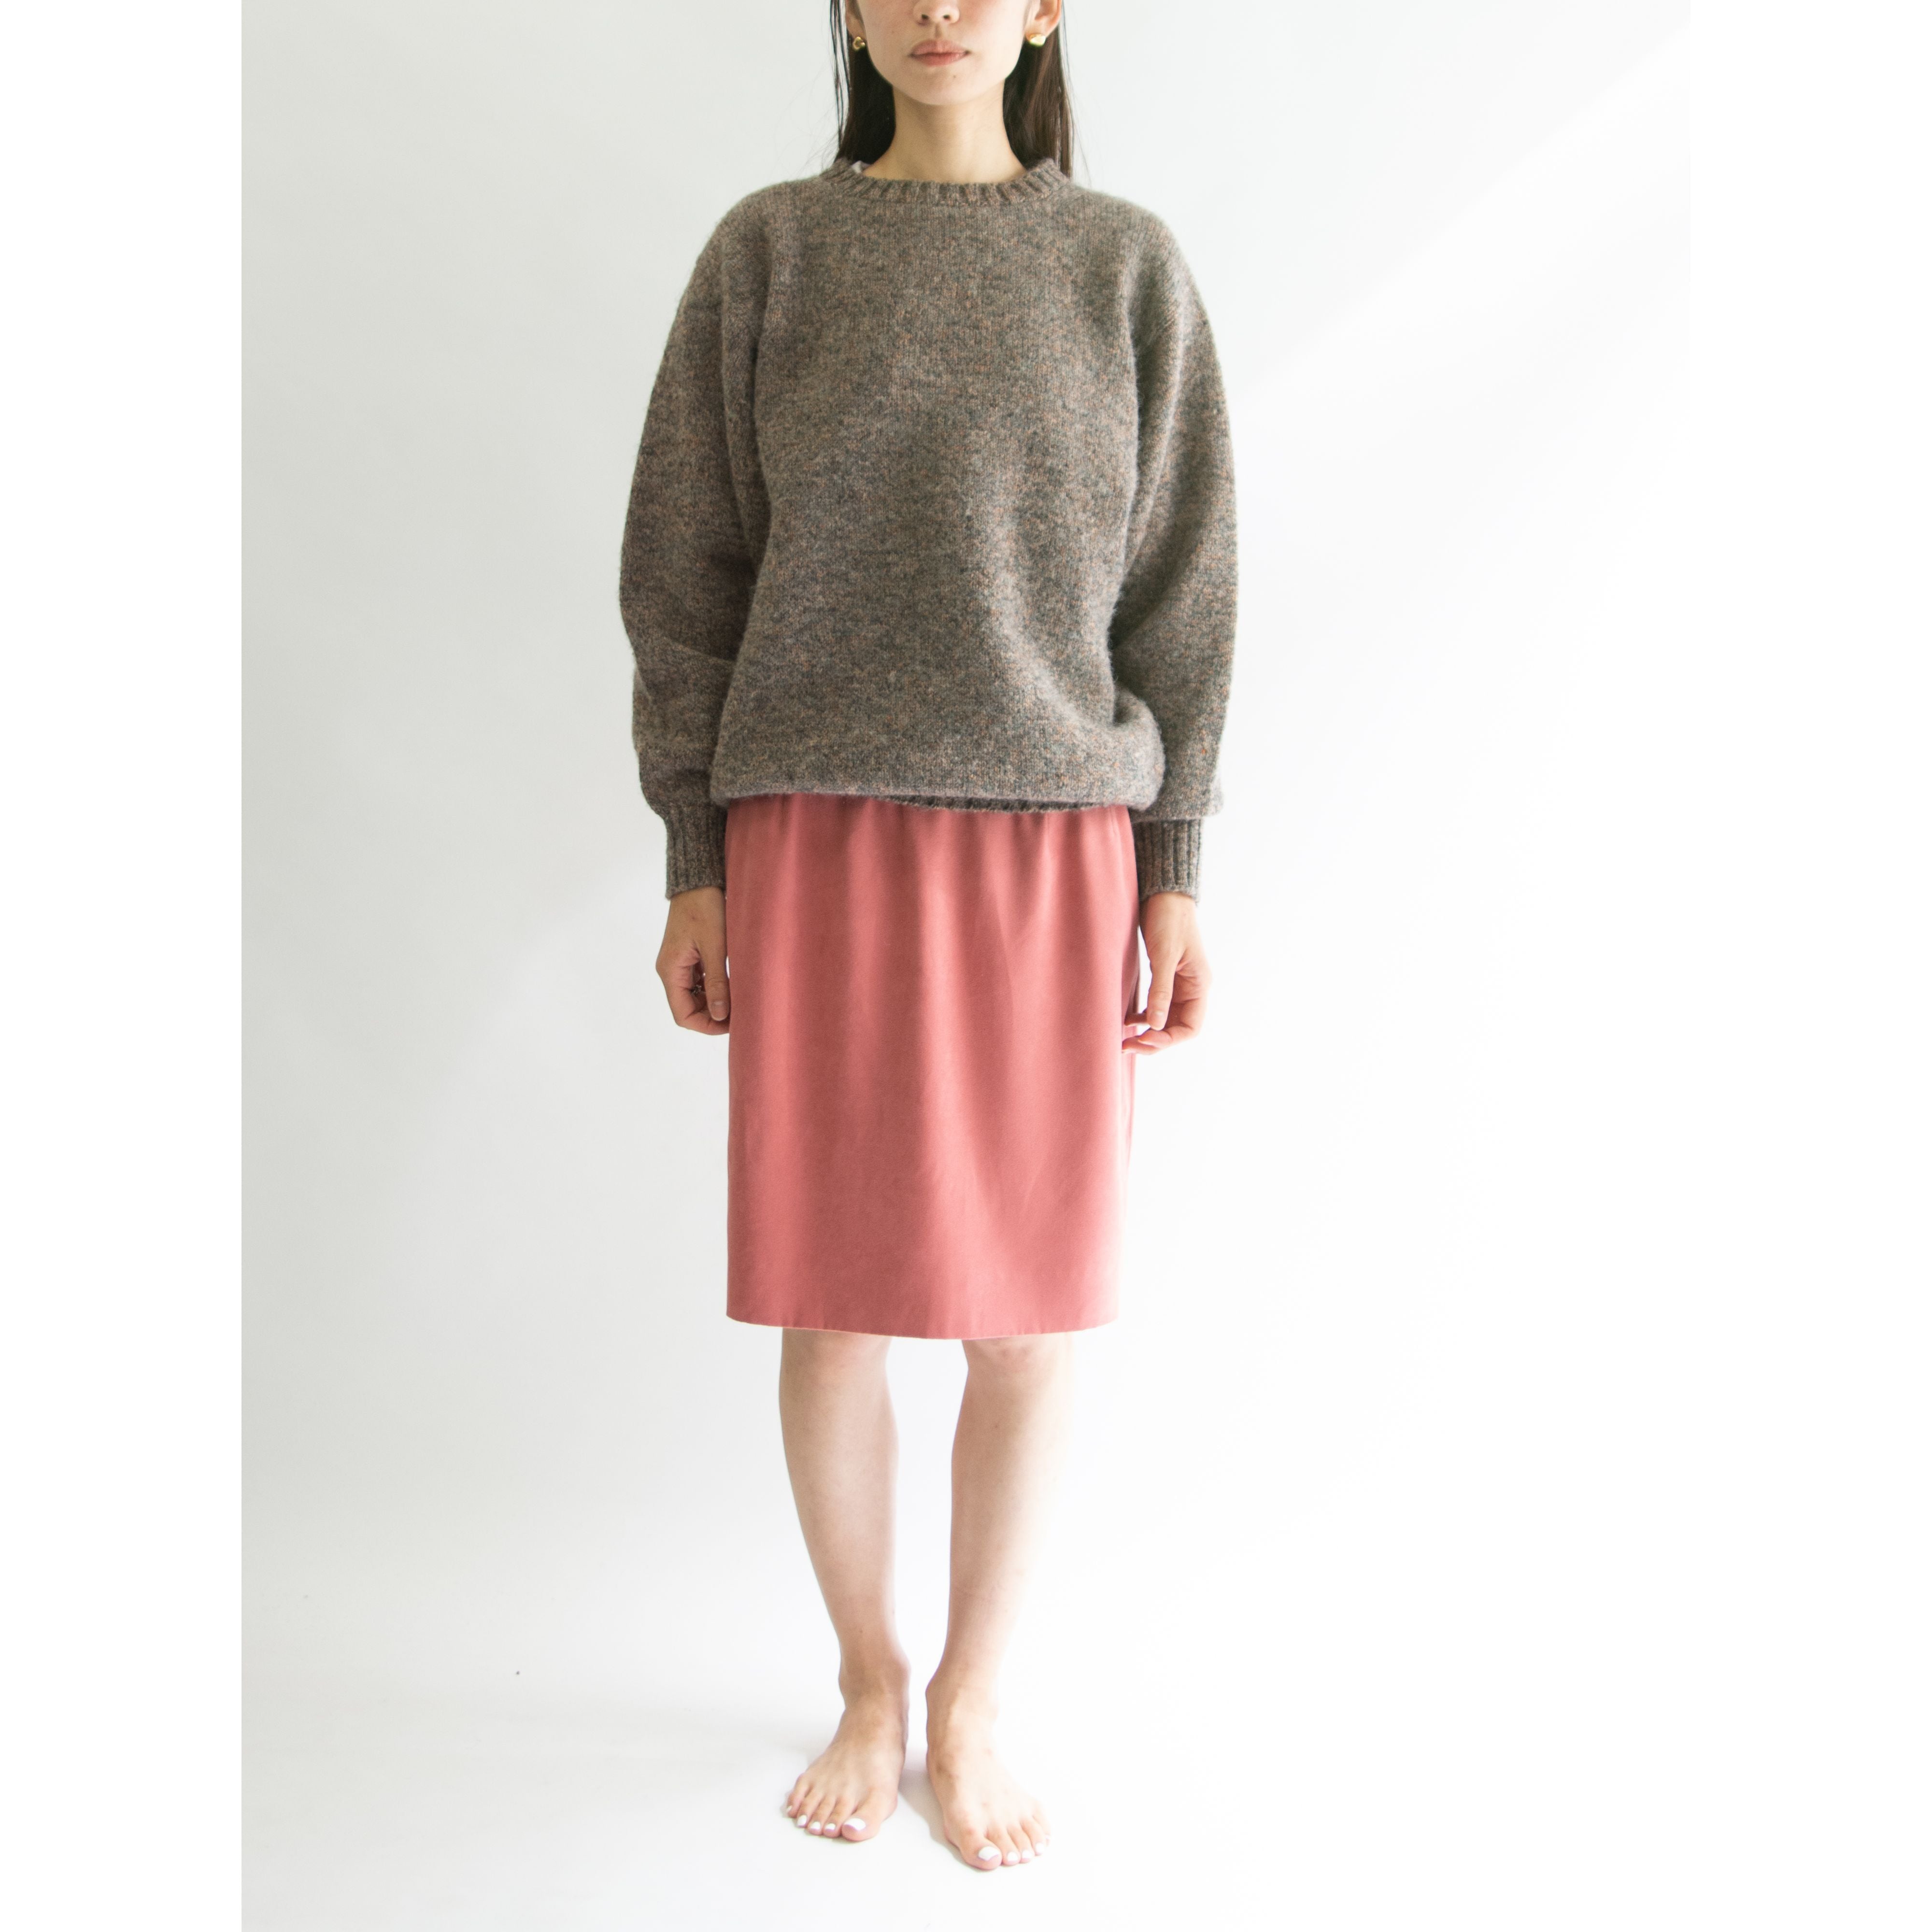 House of Tweed】Made in Scotland 100% pure wool crew neck sweater